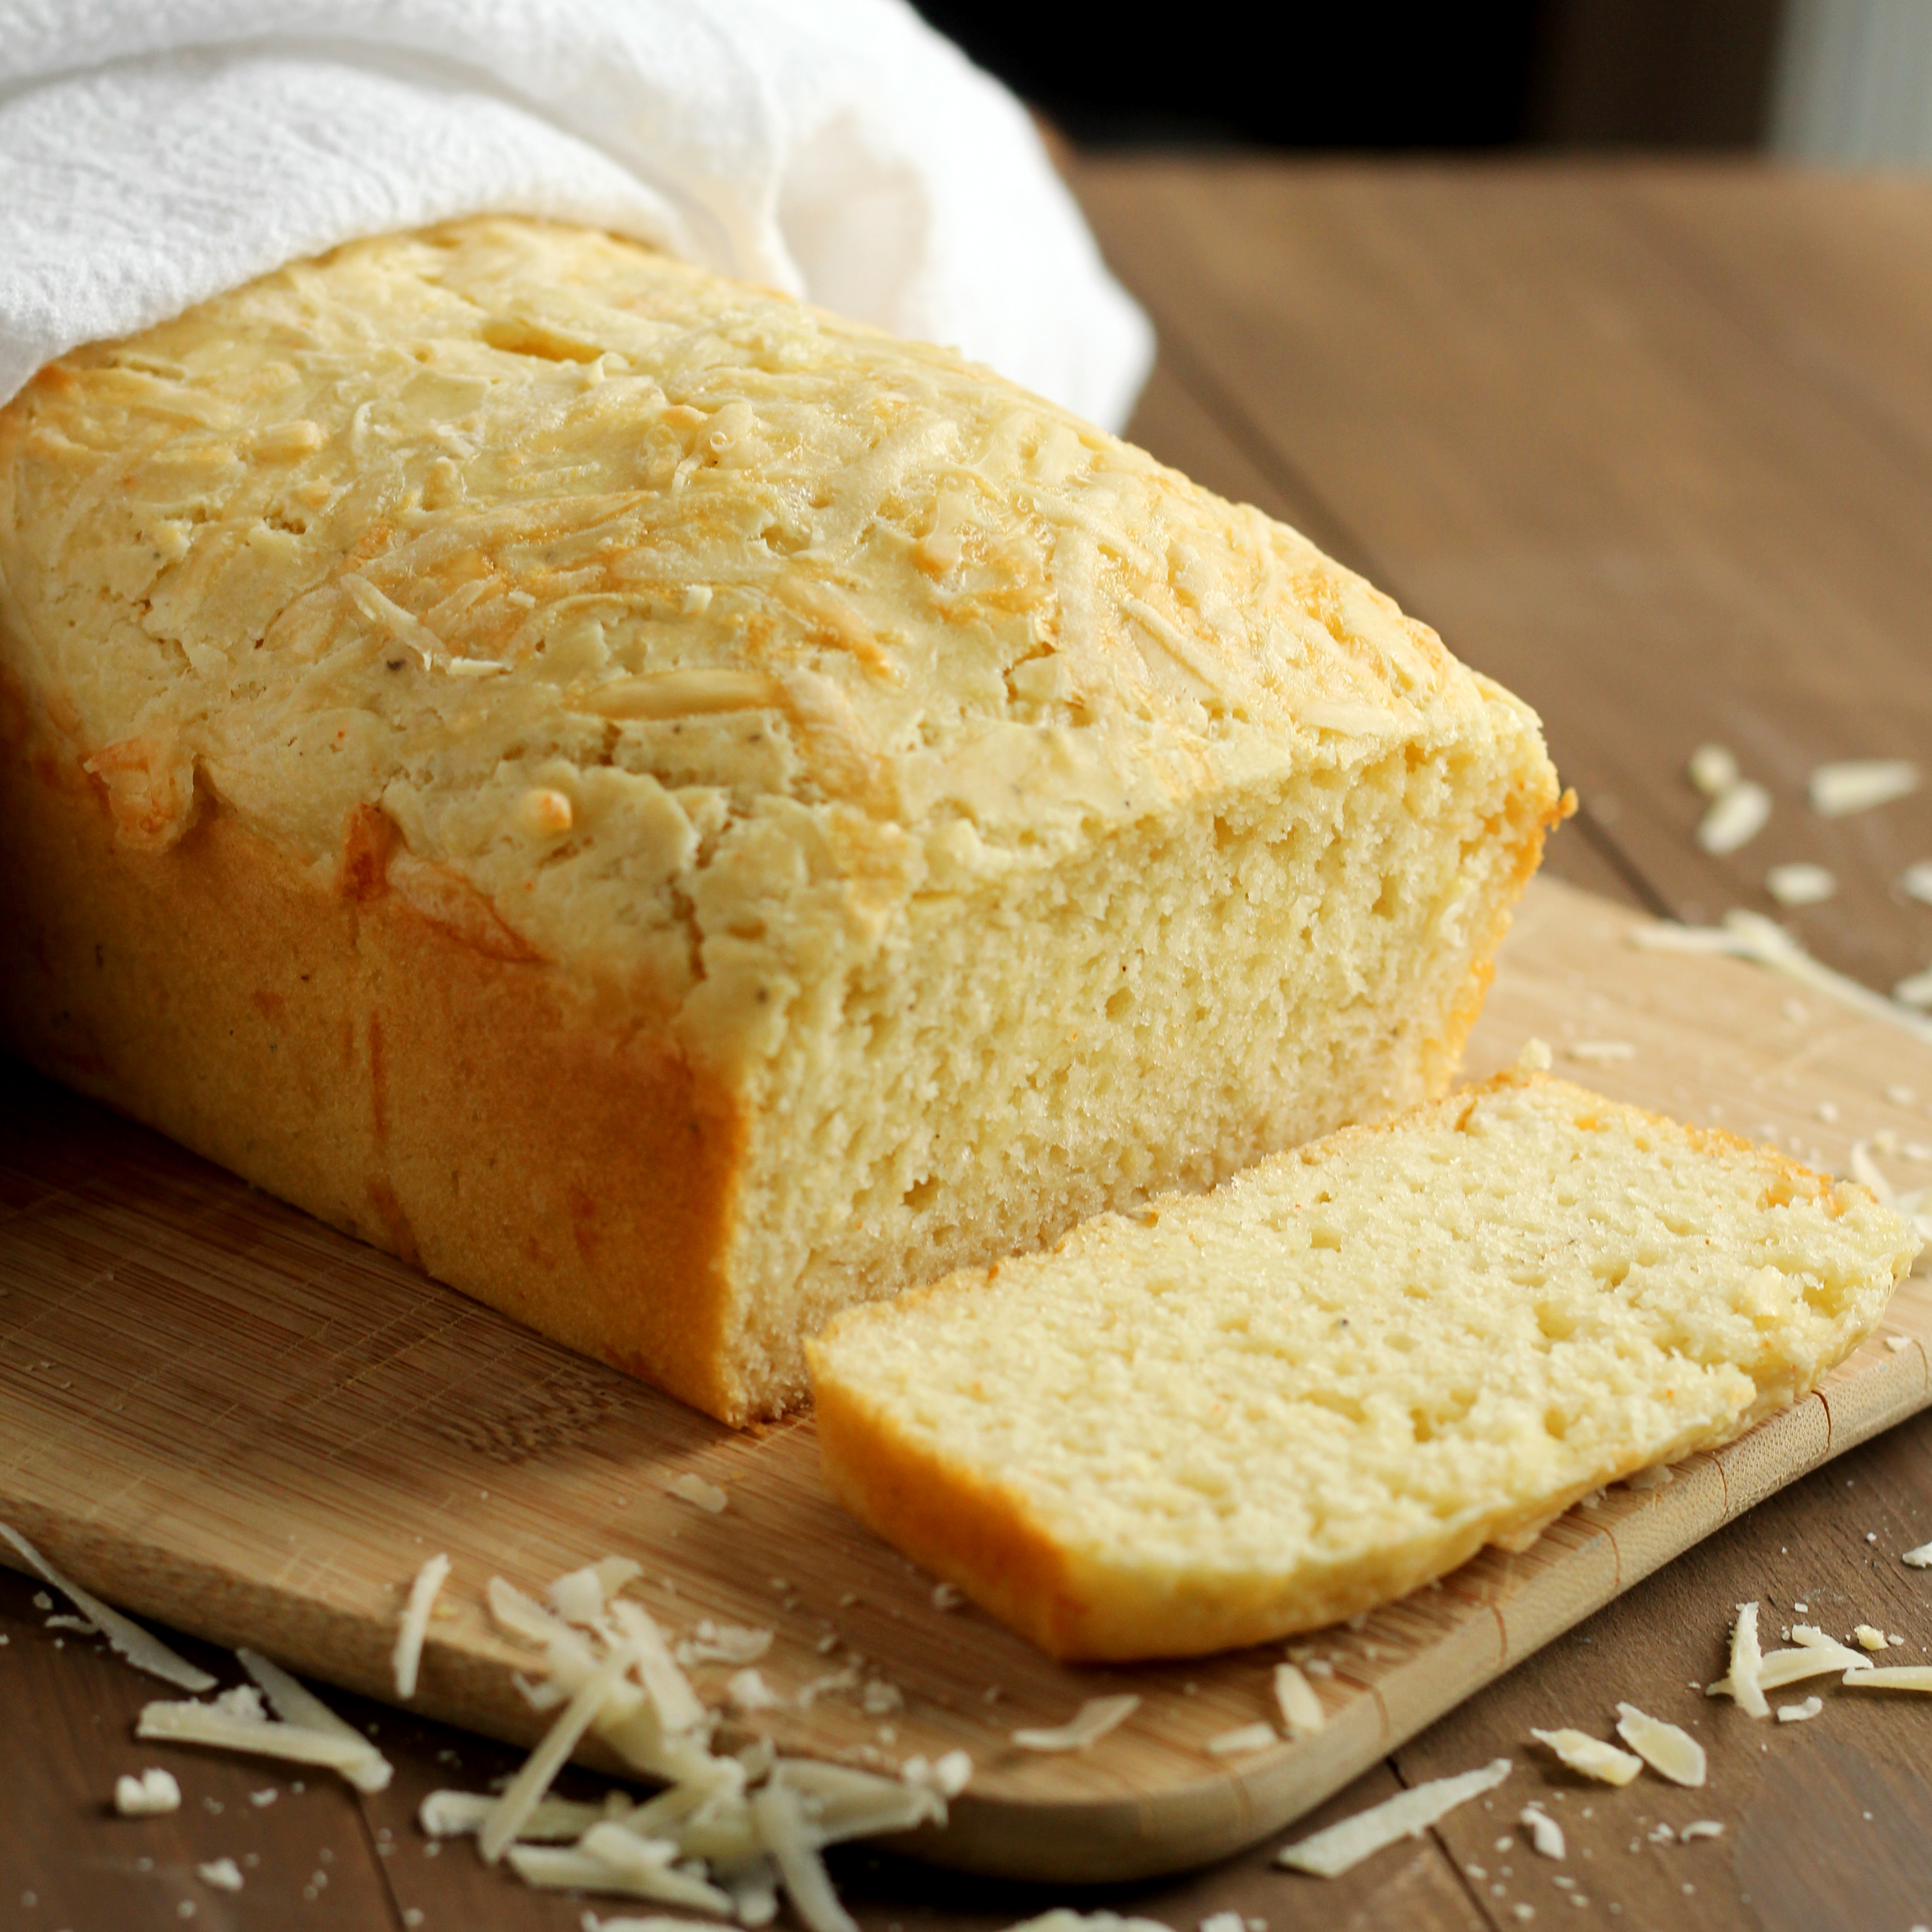 Quick, simple bread made with Parmesan and cheddar cheeses. The perfect addition to any meal. Serve alone or with honey or butter. It's delicate and tasty!